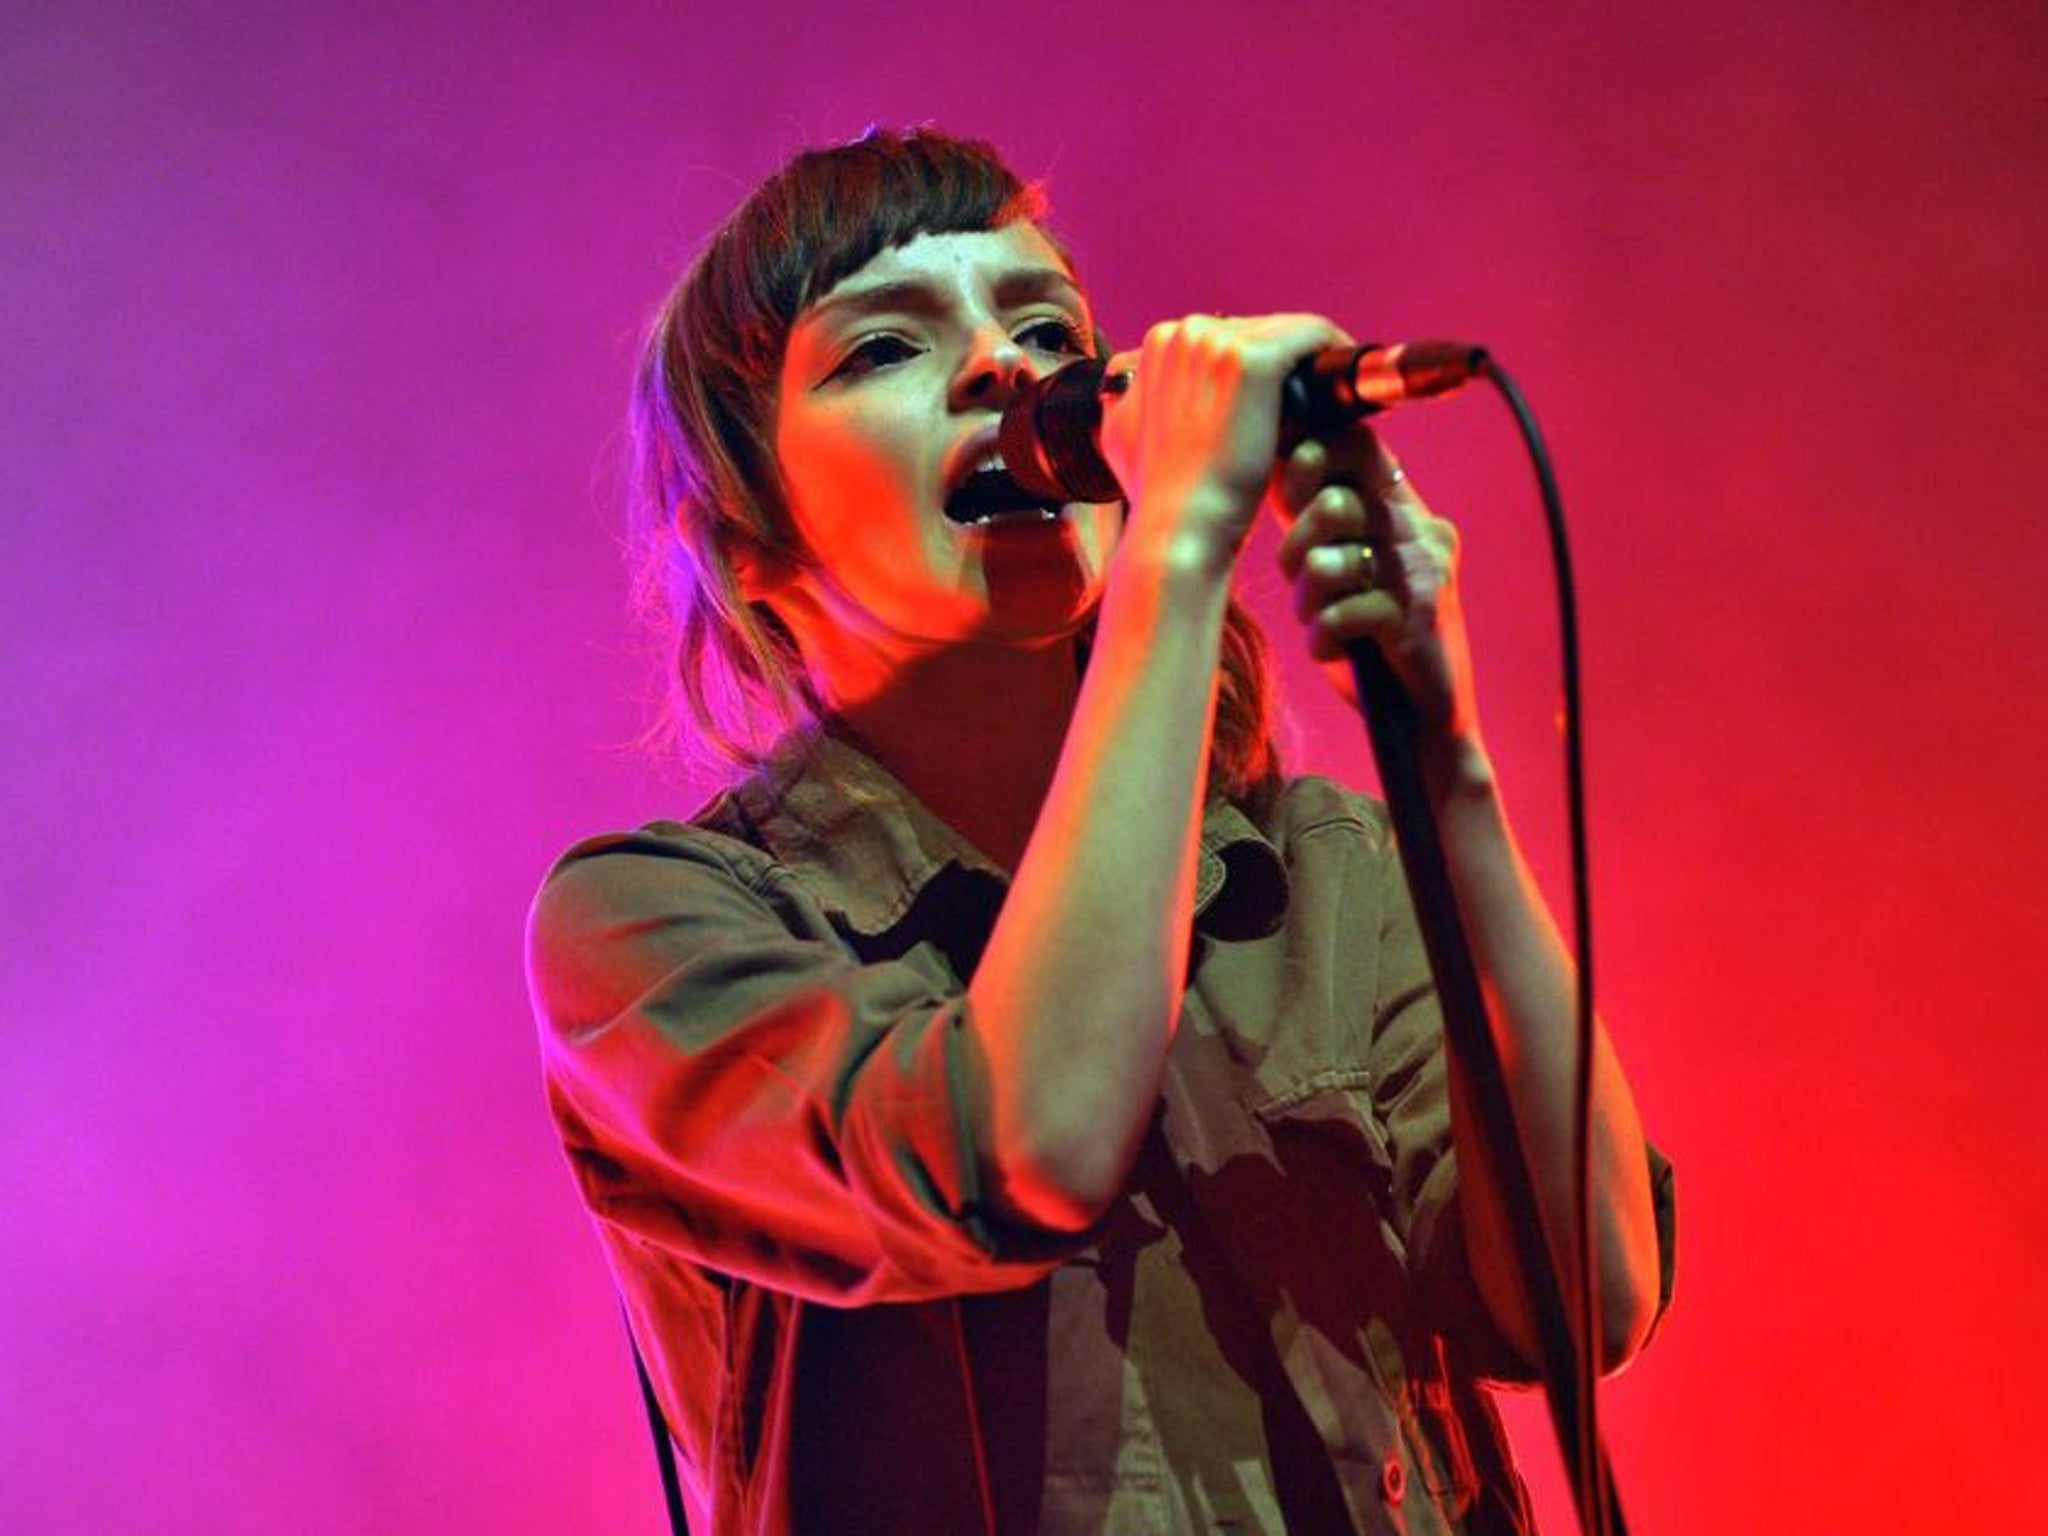 Lauren Mayberry of Chvrches performs on stage